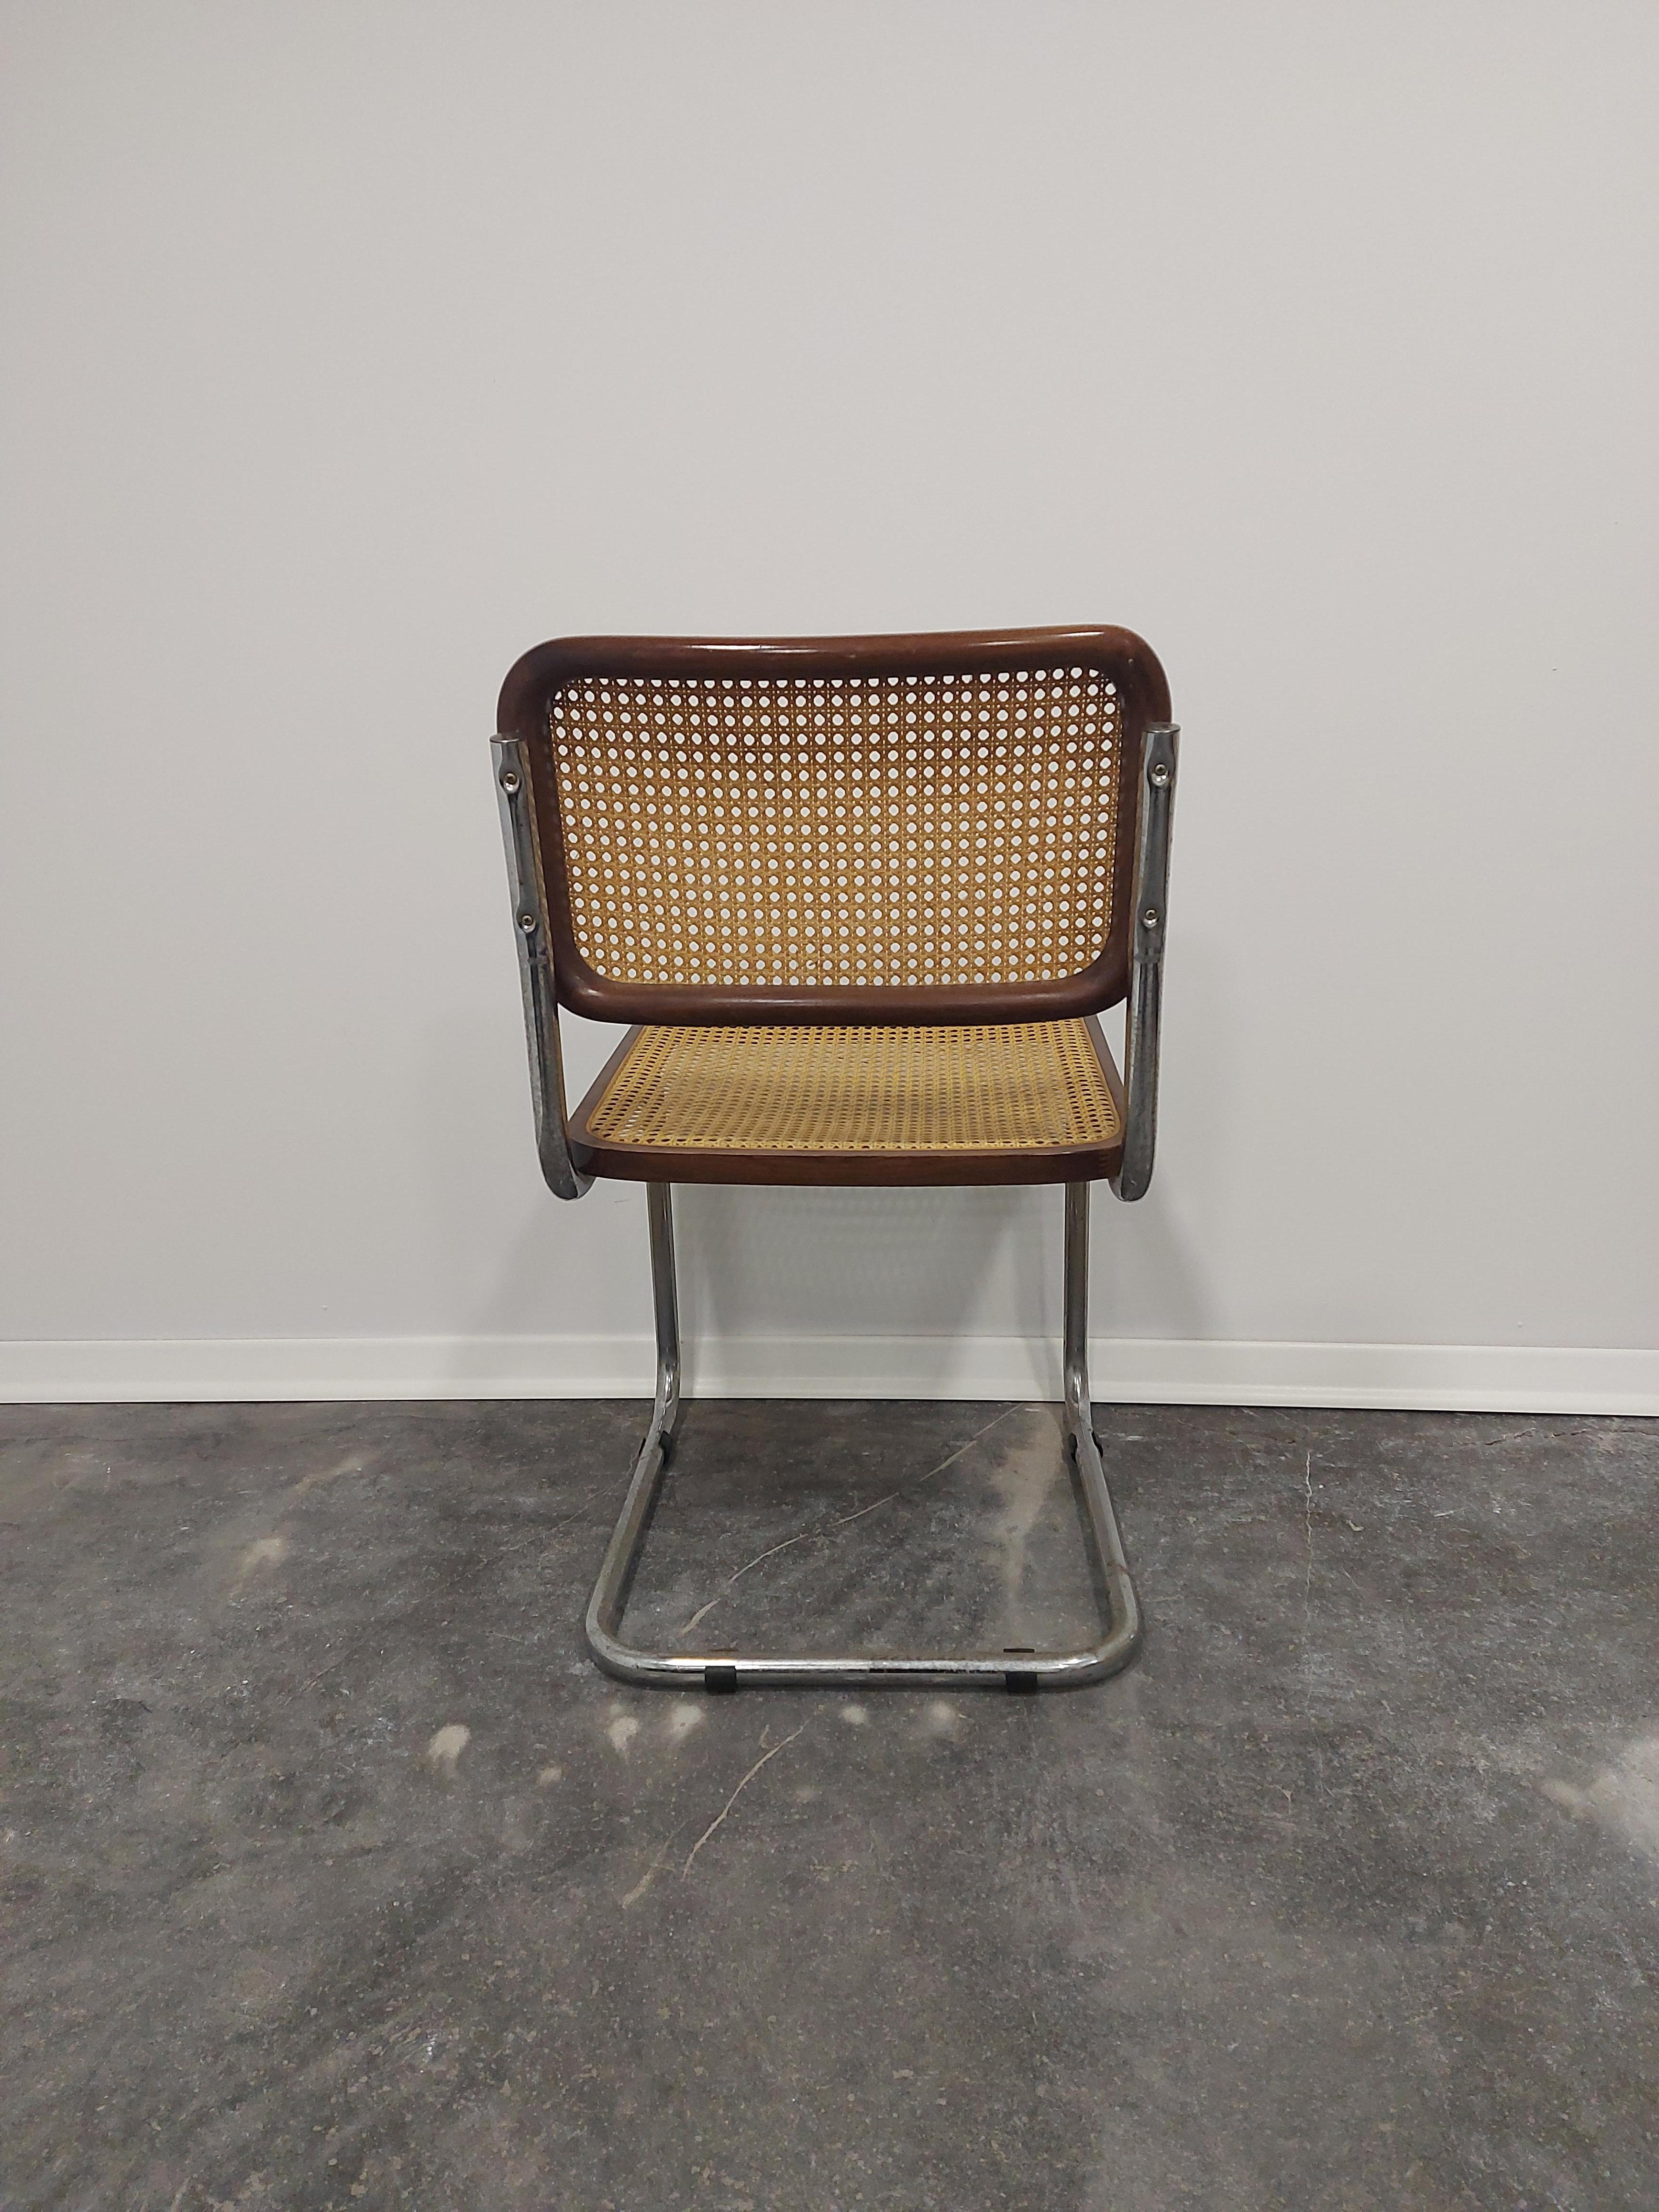 Cesca Chair by Marcel Breuer 1970s B32 1 of 5 For Sale 8